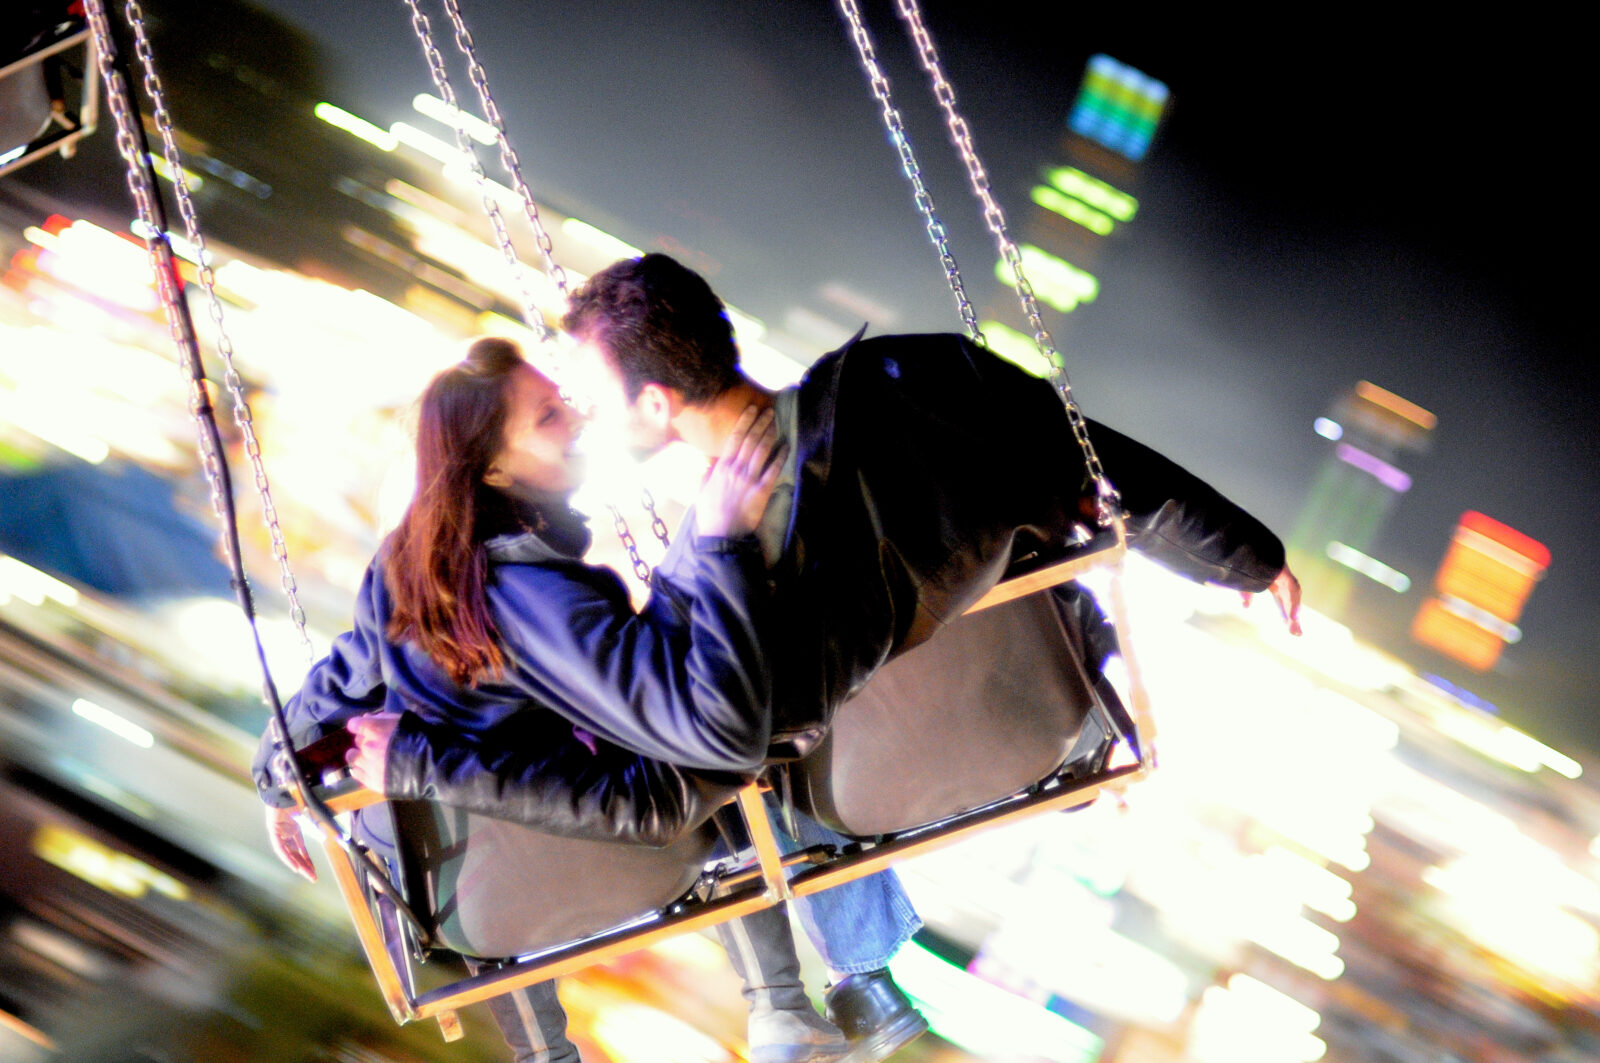 Woman in blue jacket and brown hair embraces a man in a black jacket on suspended swings at the North Carolina State Fair with blurred lights 